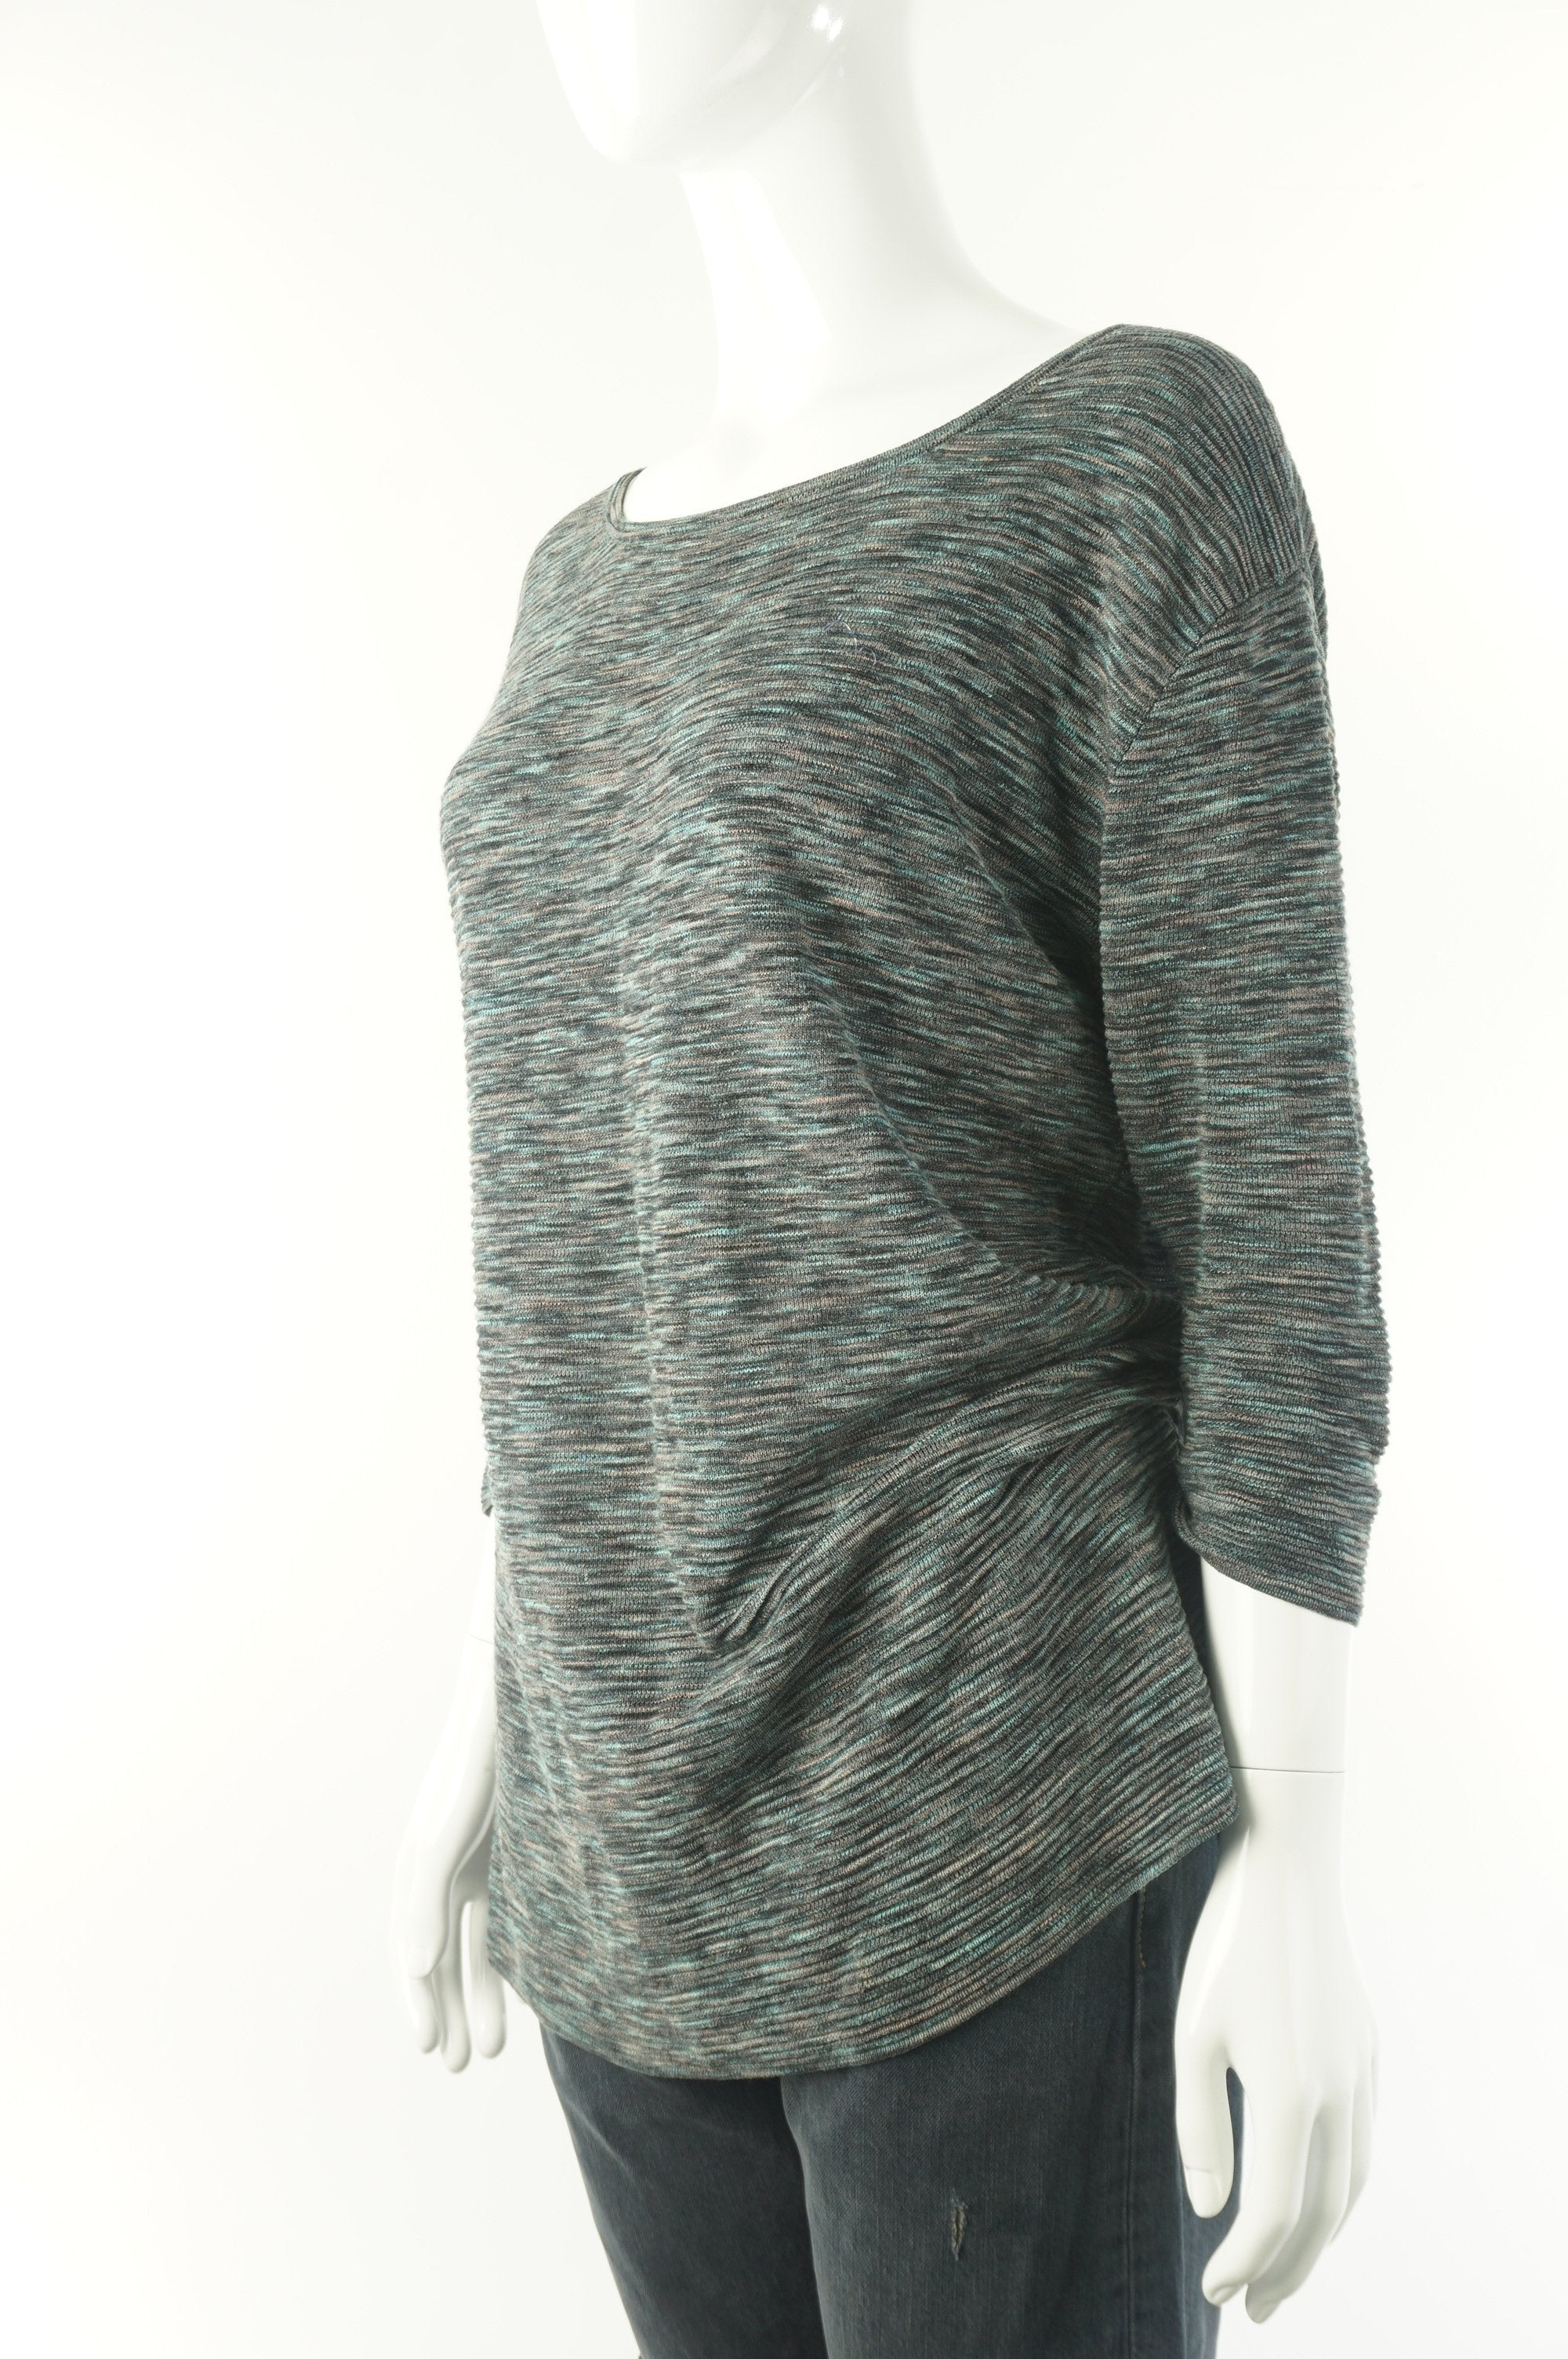 Wilfred Pullover Sweater, Relazed fit with dropped shoulder. Perfect for everyday wear., Grey, Green, 68% viscose, 28% linen, 12% Nylon, women's Tops, women's Grey, Green Tops, Wilfred women's Tops, wilfred loose sweater, arizia women's loose sweater, women's sweater, wilfred women's pullover